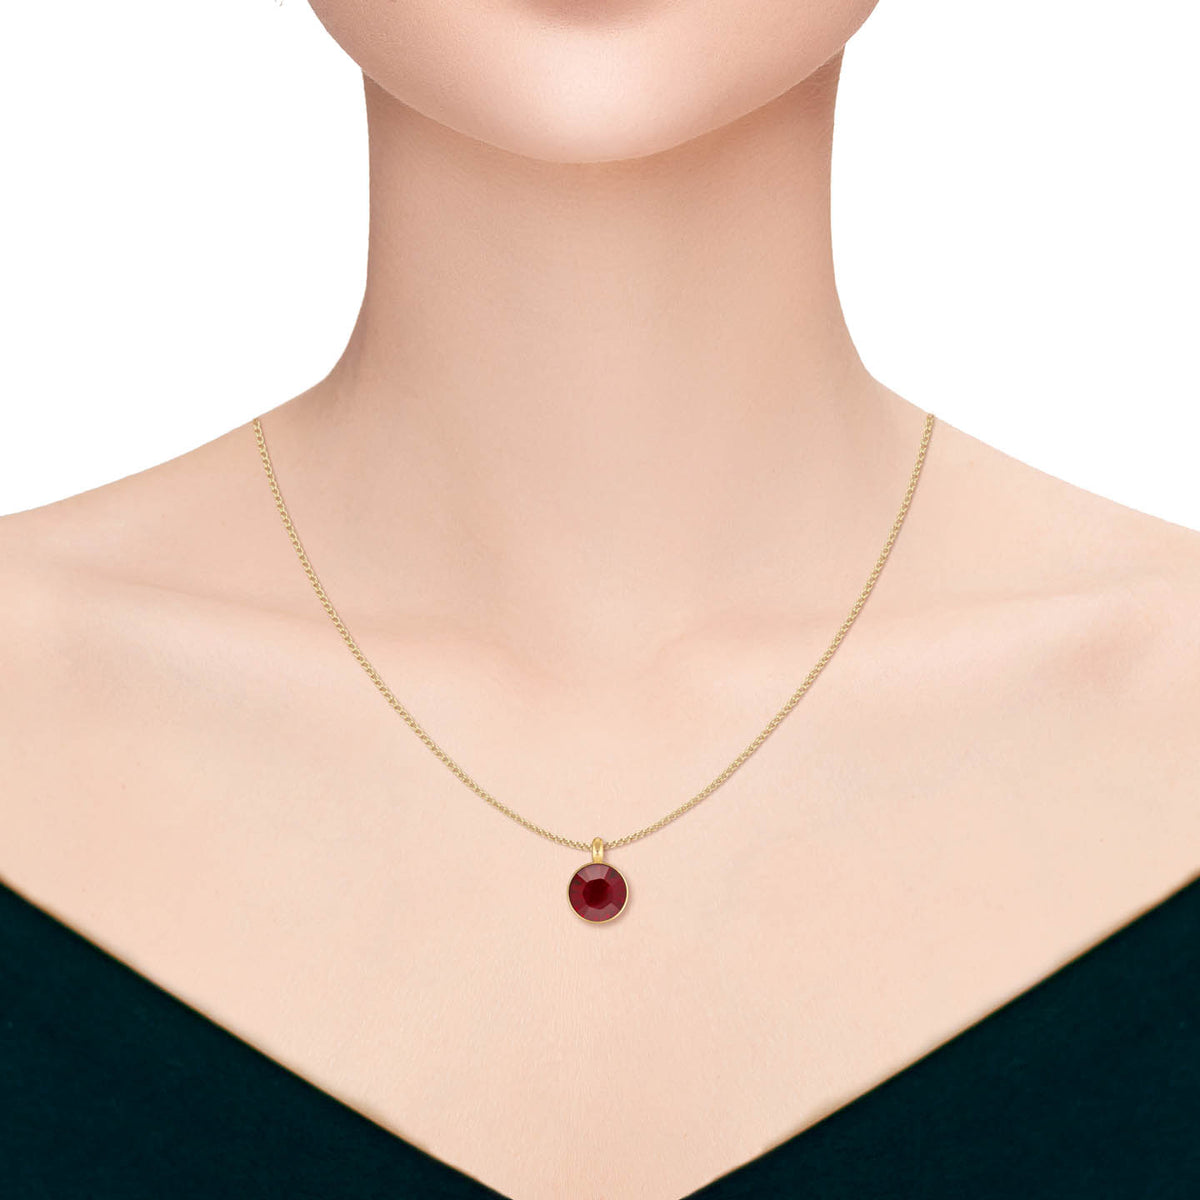 Bella Pendant Necklace with Red Siam Round Crystals from Swarovski Gold Plated - Ed Heart